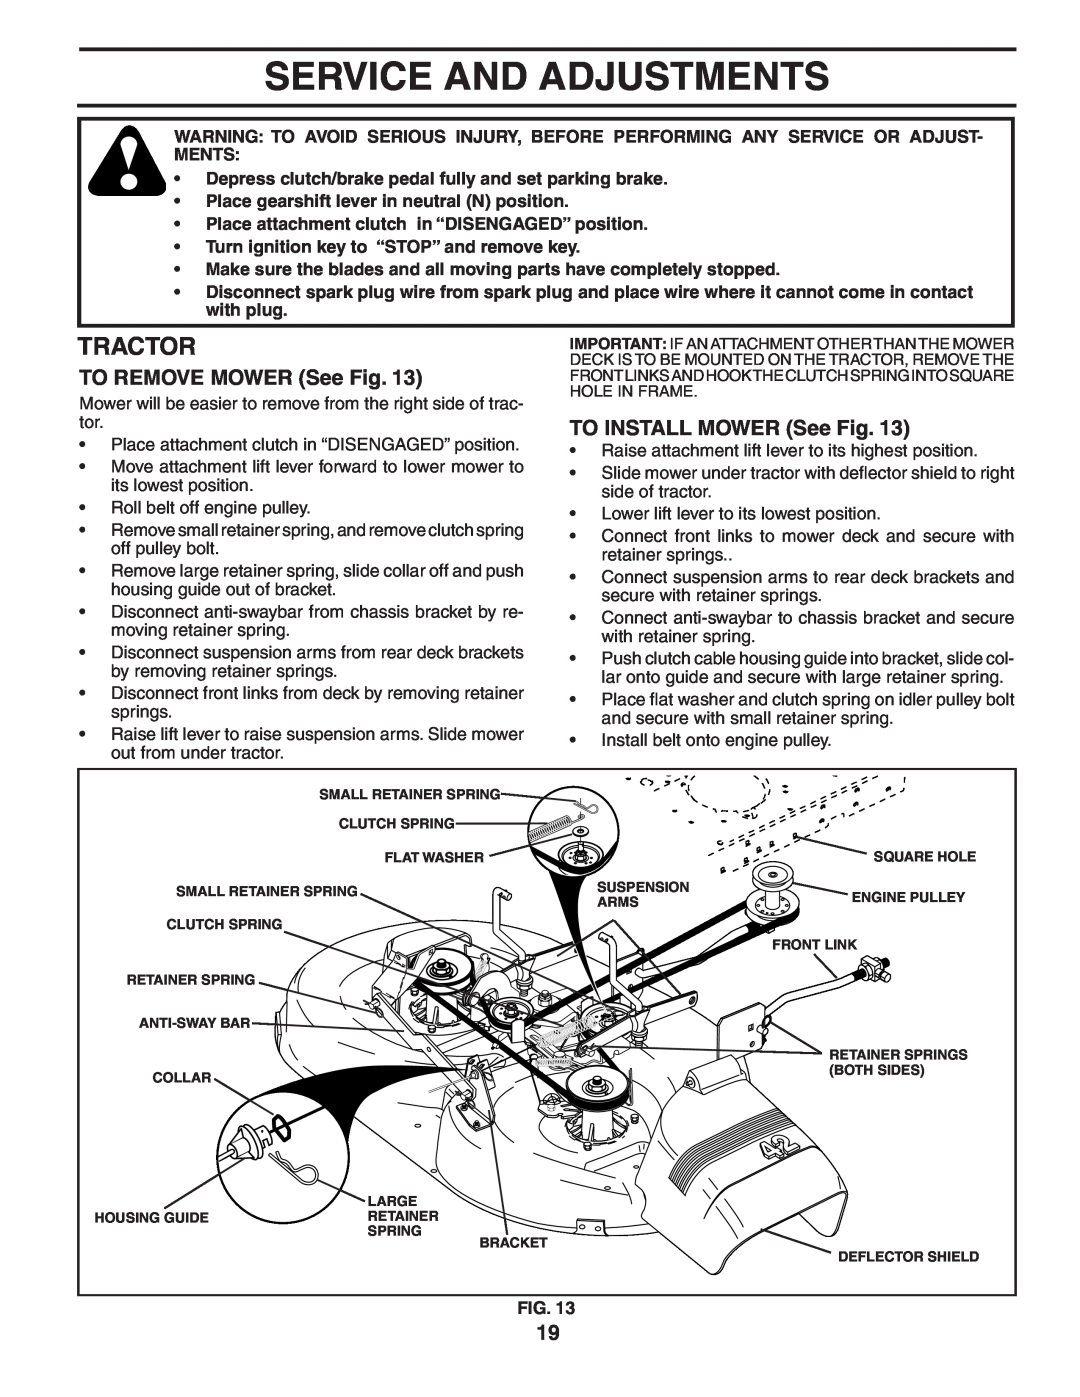 Poulan HD17542 manual Service And Adjustments, TO REMOVE MOWER See Fig, TO INSTALL MOWER See Fig, Tractor 